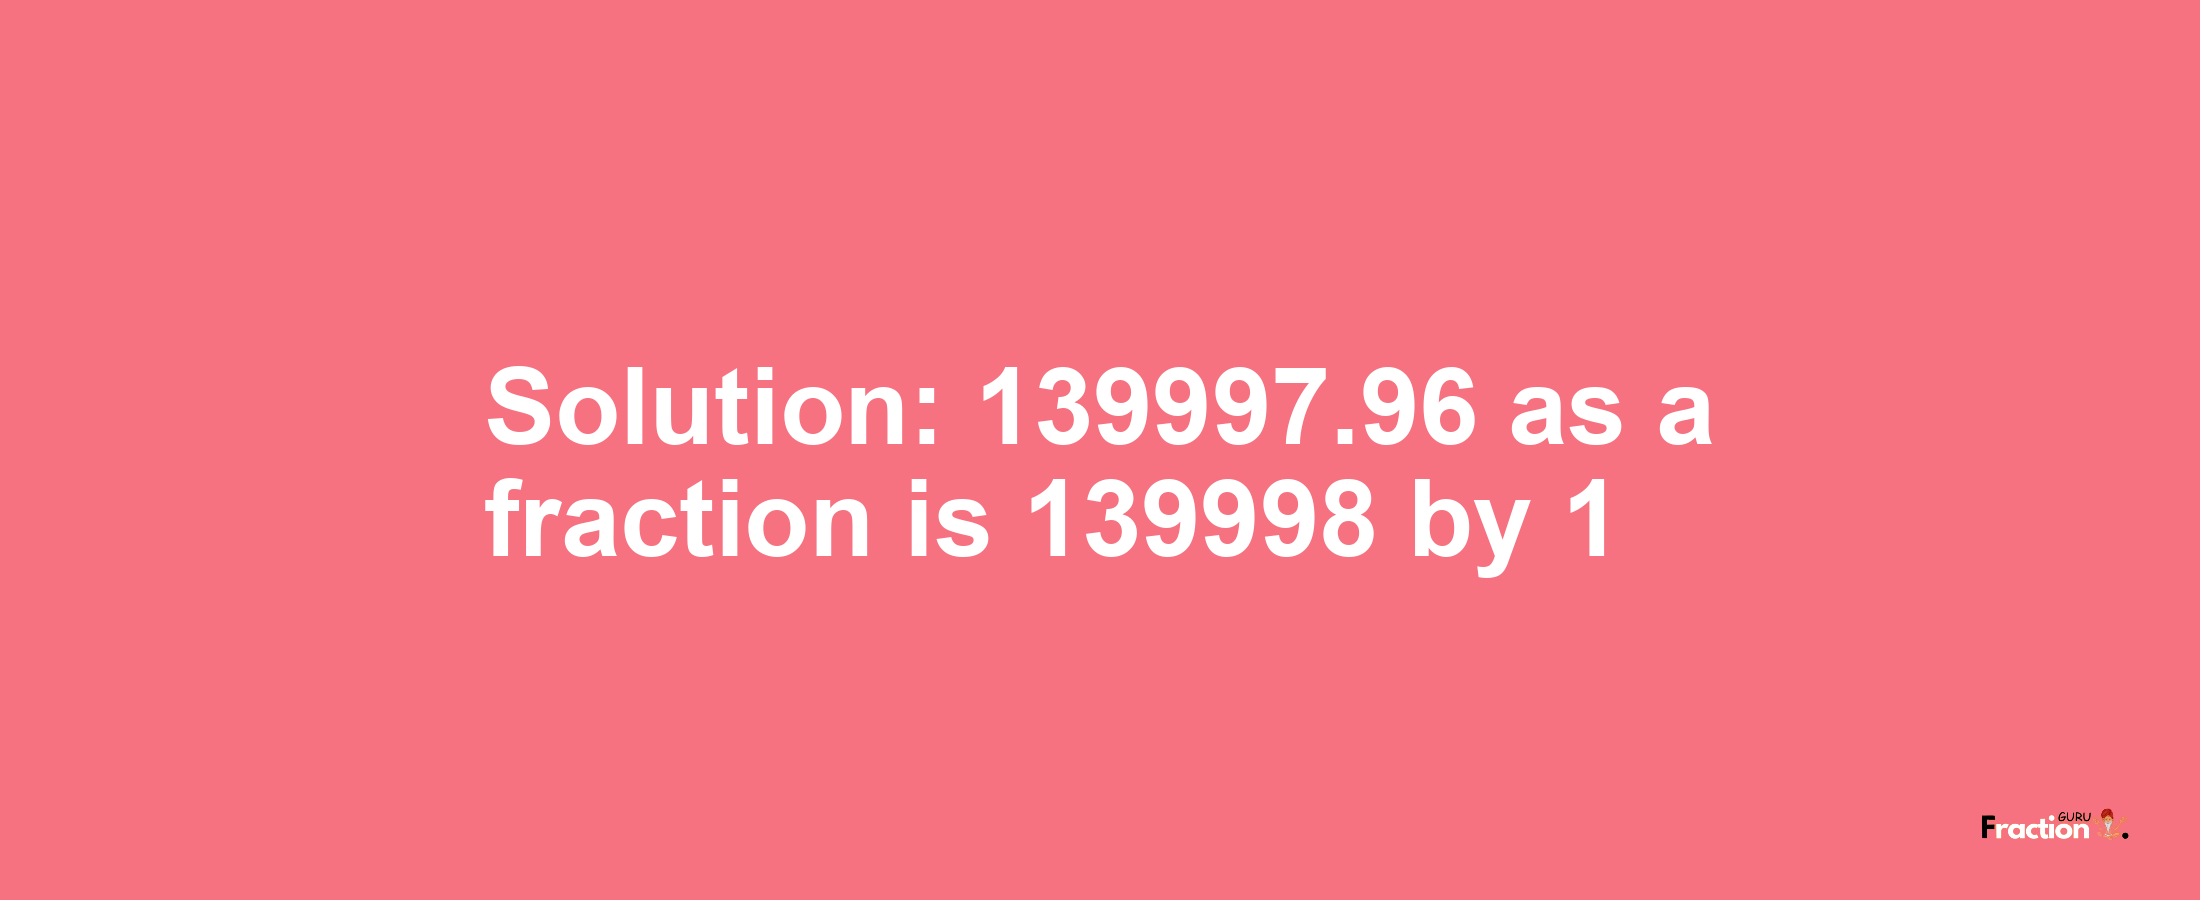 Solution:139997.96 as a fraction is 139998/1